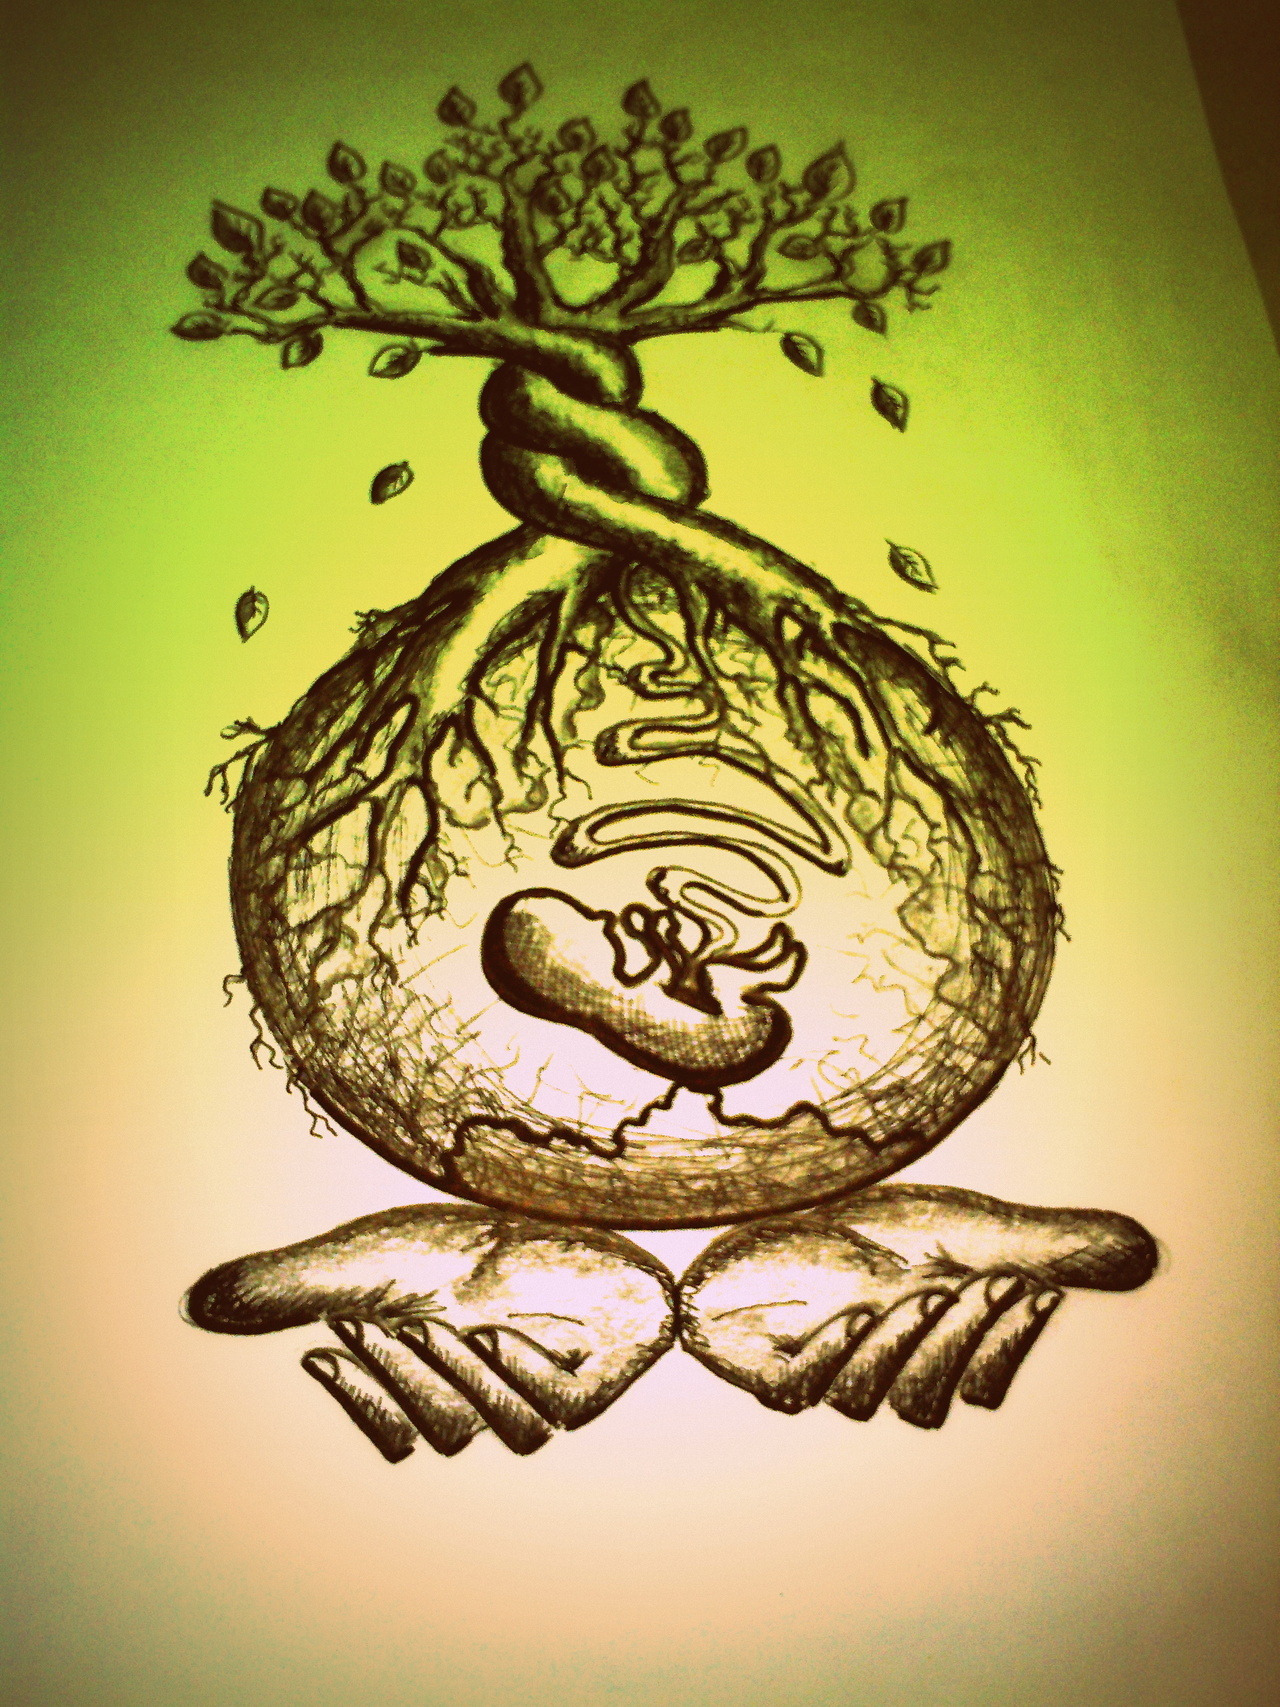 Update more than 81 mother earth save earth drawing - xkldase.edu.vn